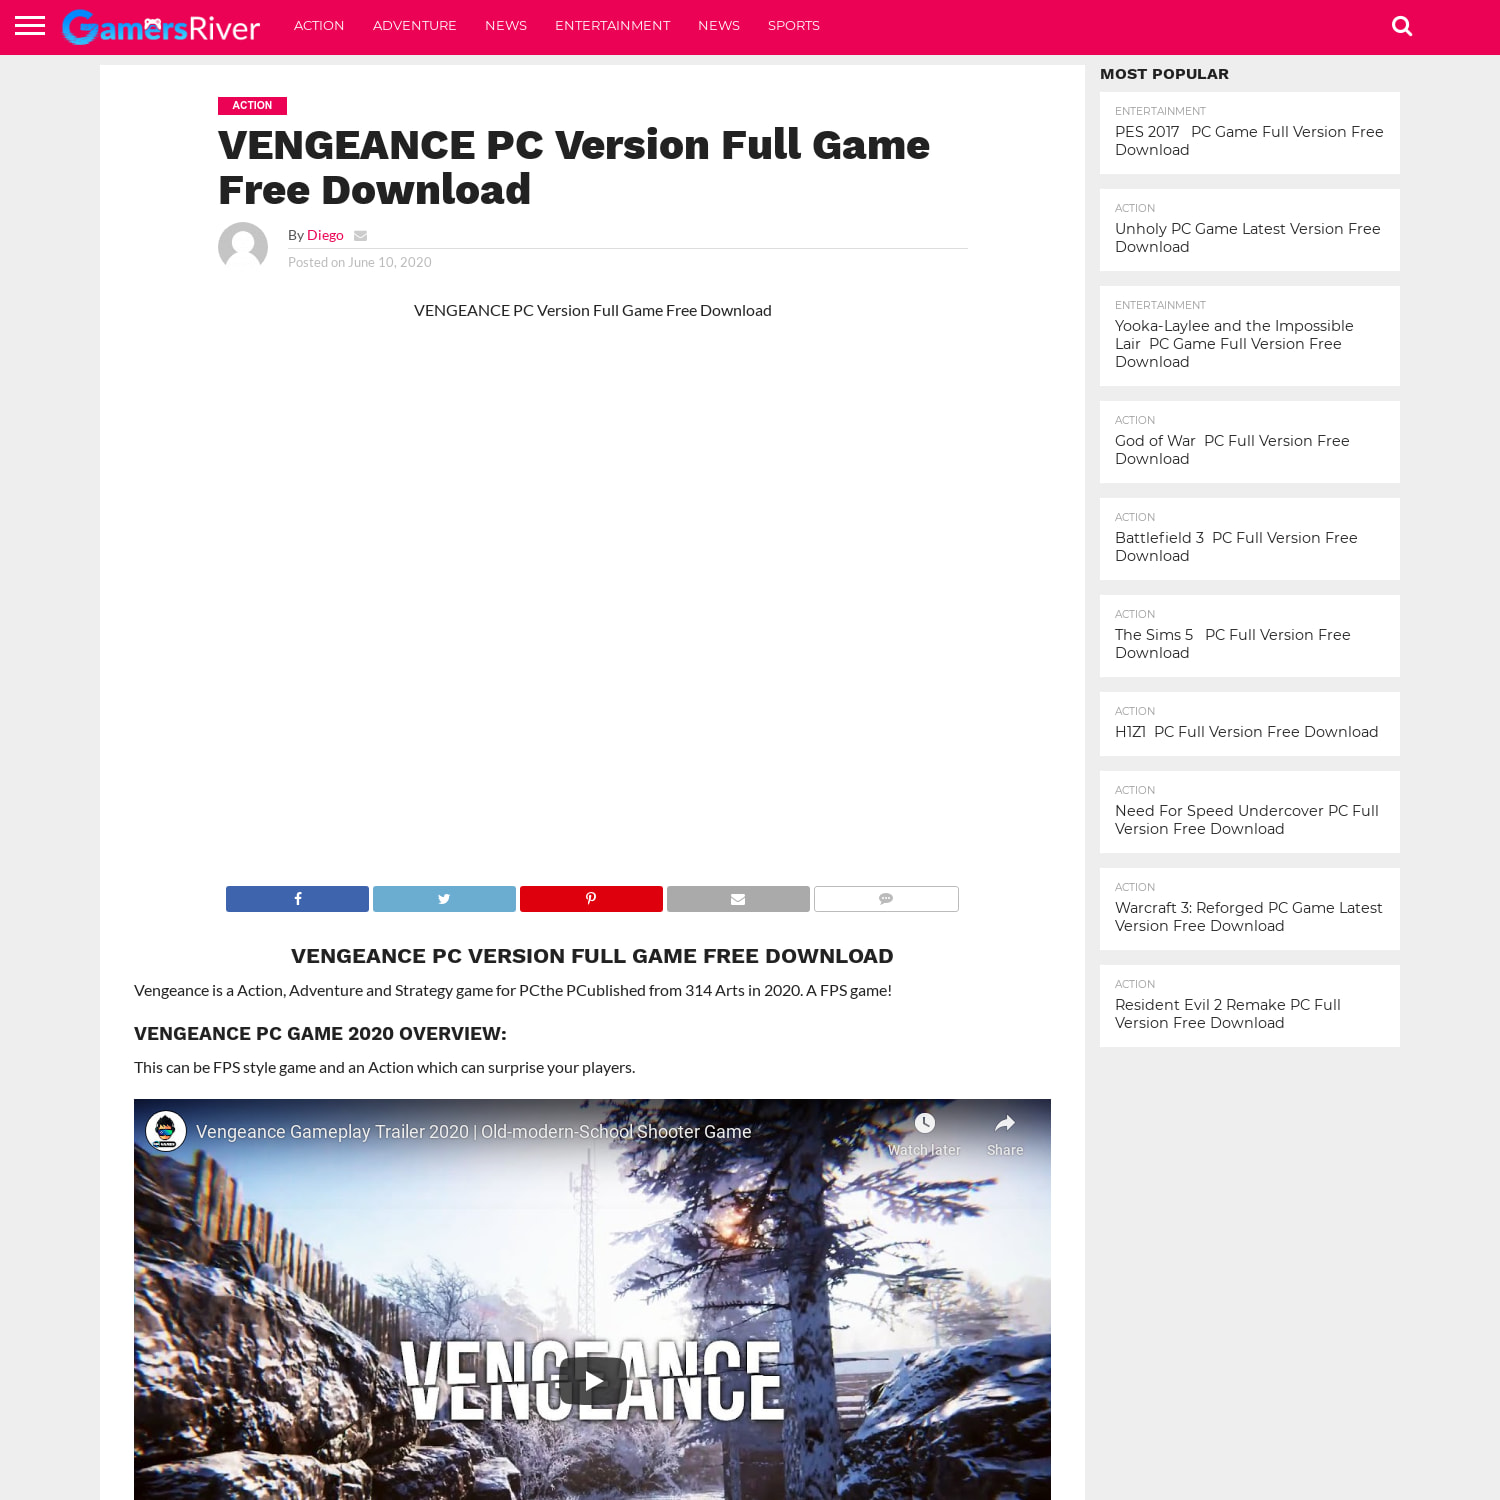 VENGEANCE PC Version Full Game Free Download